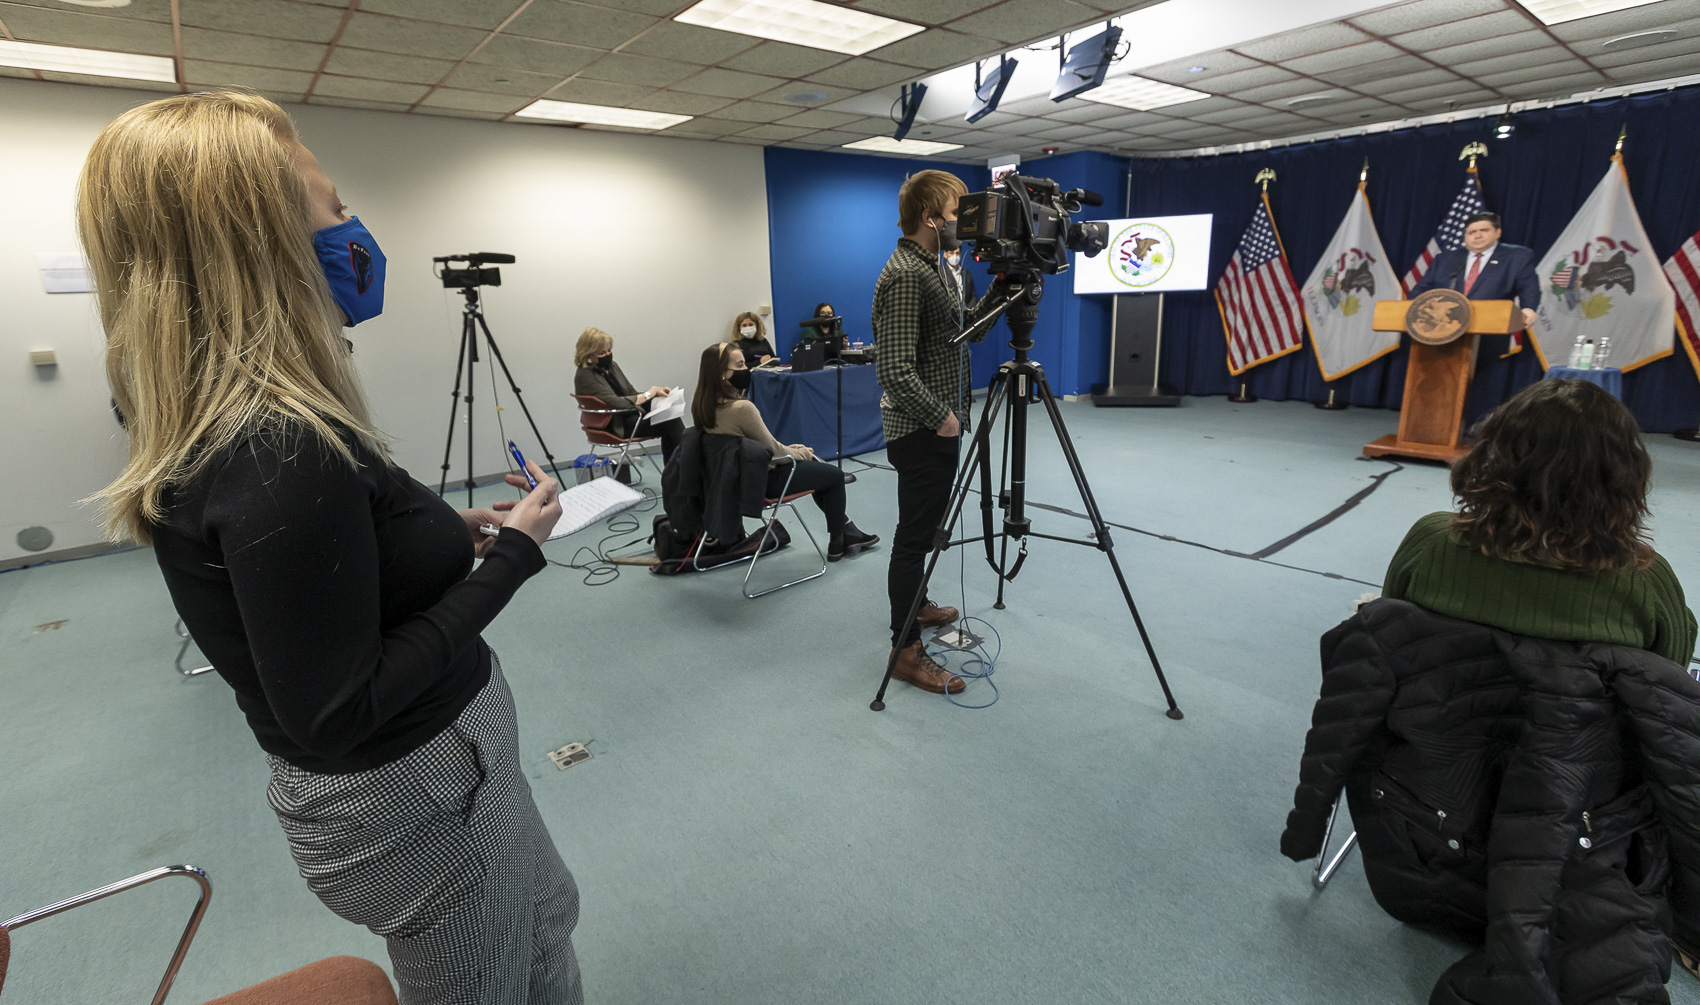 Journalism student Emma Oxnevad asks Governor Pritzker a question. The students had prepared questions in advance of the meeting with Pritzker and as part of their class carriculum. (DePaul University/Jeff Carrion)